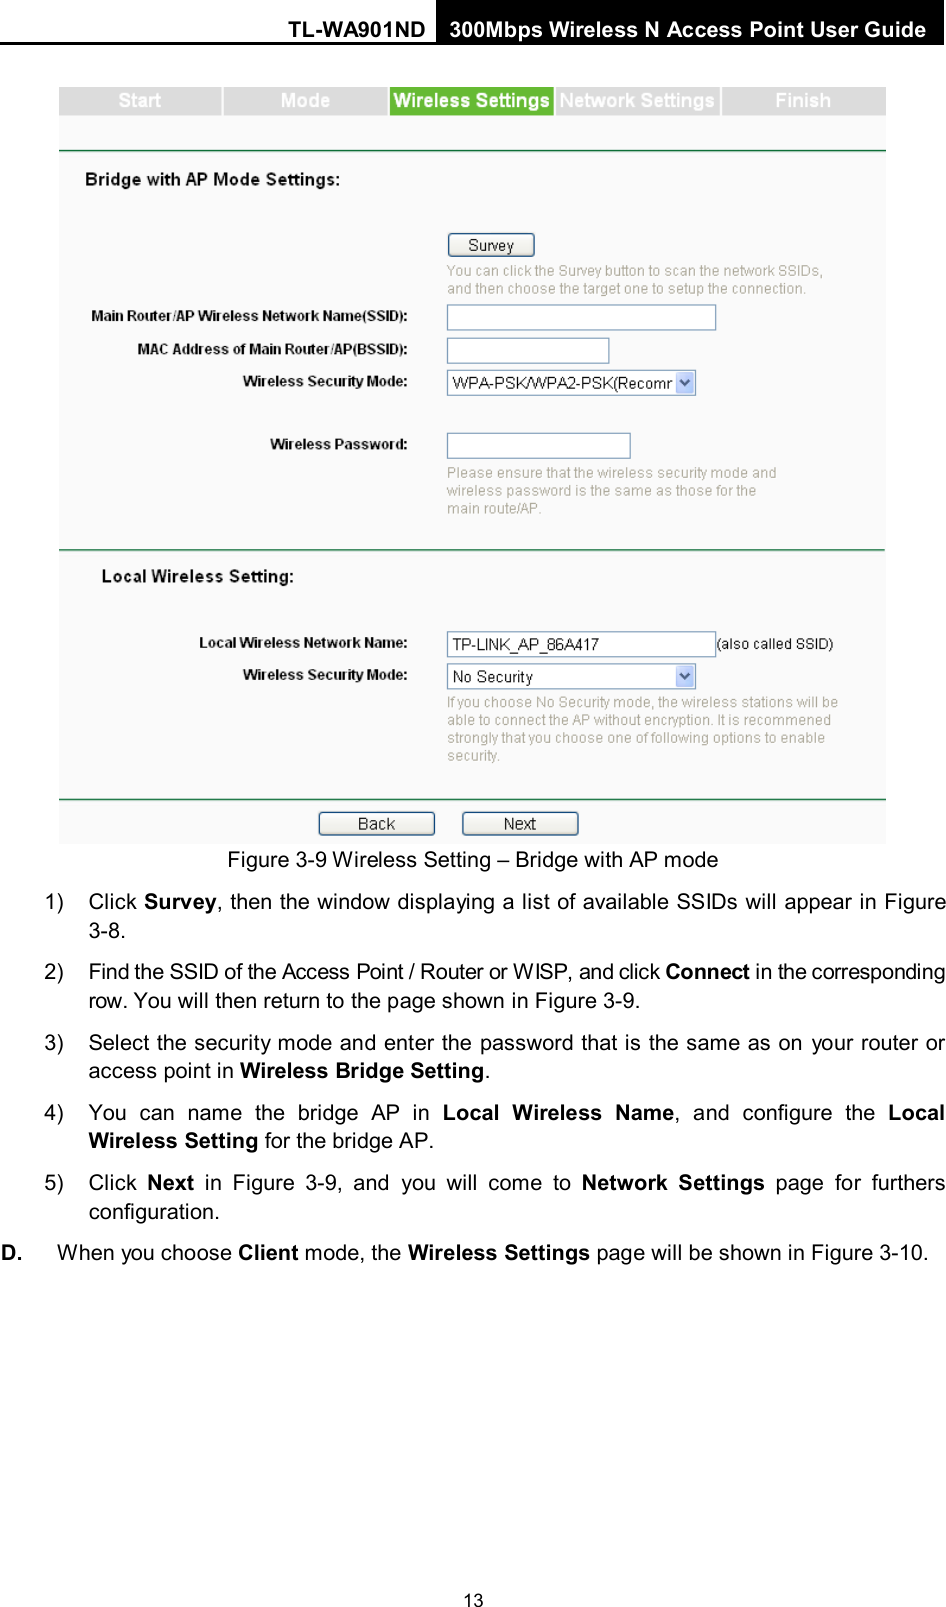 TL-WA901ND 300Mbps Wireless N Access Point User Guide  13  Figure 3-9 Wireless Setting – Bridge with AP mode 1) Click Survey, then the window displaying a list of available SSIDs will appear in Figure 3-8. 2) Find the SSID of the Access Point / Router or W ISP, and click Connect in the corresponding row. You will then return to the page shown in Figure 3-9. 3) Select the security mode and enter the password that is the same as on your router or access point in Wireless Bridge Setting.   4) You can name the bridge AP in  Local Wireless Name,  and configure the Local Wireless Setting for the bridge AP.   5) Click  Next in  Figure  3-9,  and you will come to Network Settings page for furthers configuration. D. When you choose Client mode, the Wireless Settings page will be shown in Figure 3-10. 